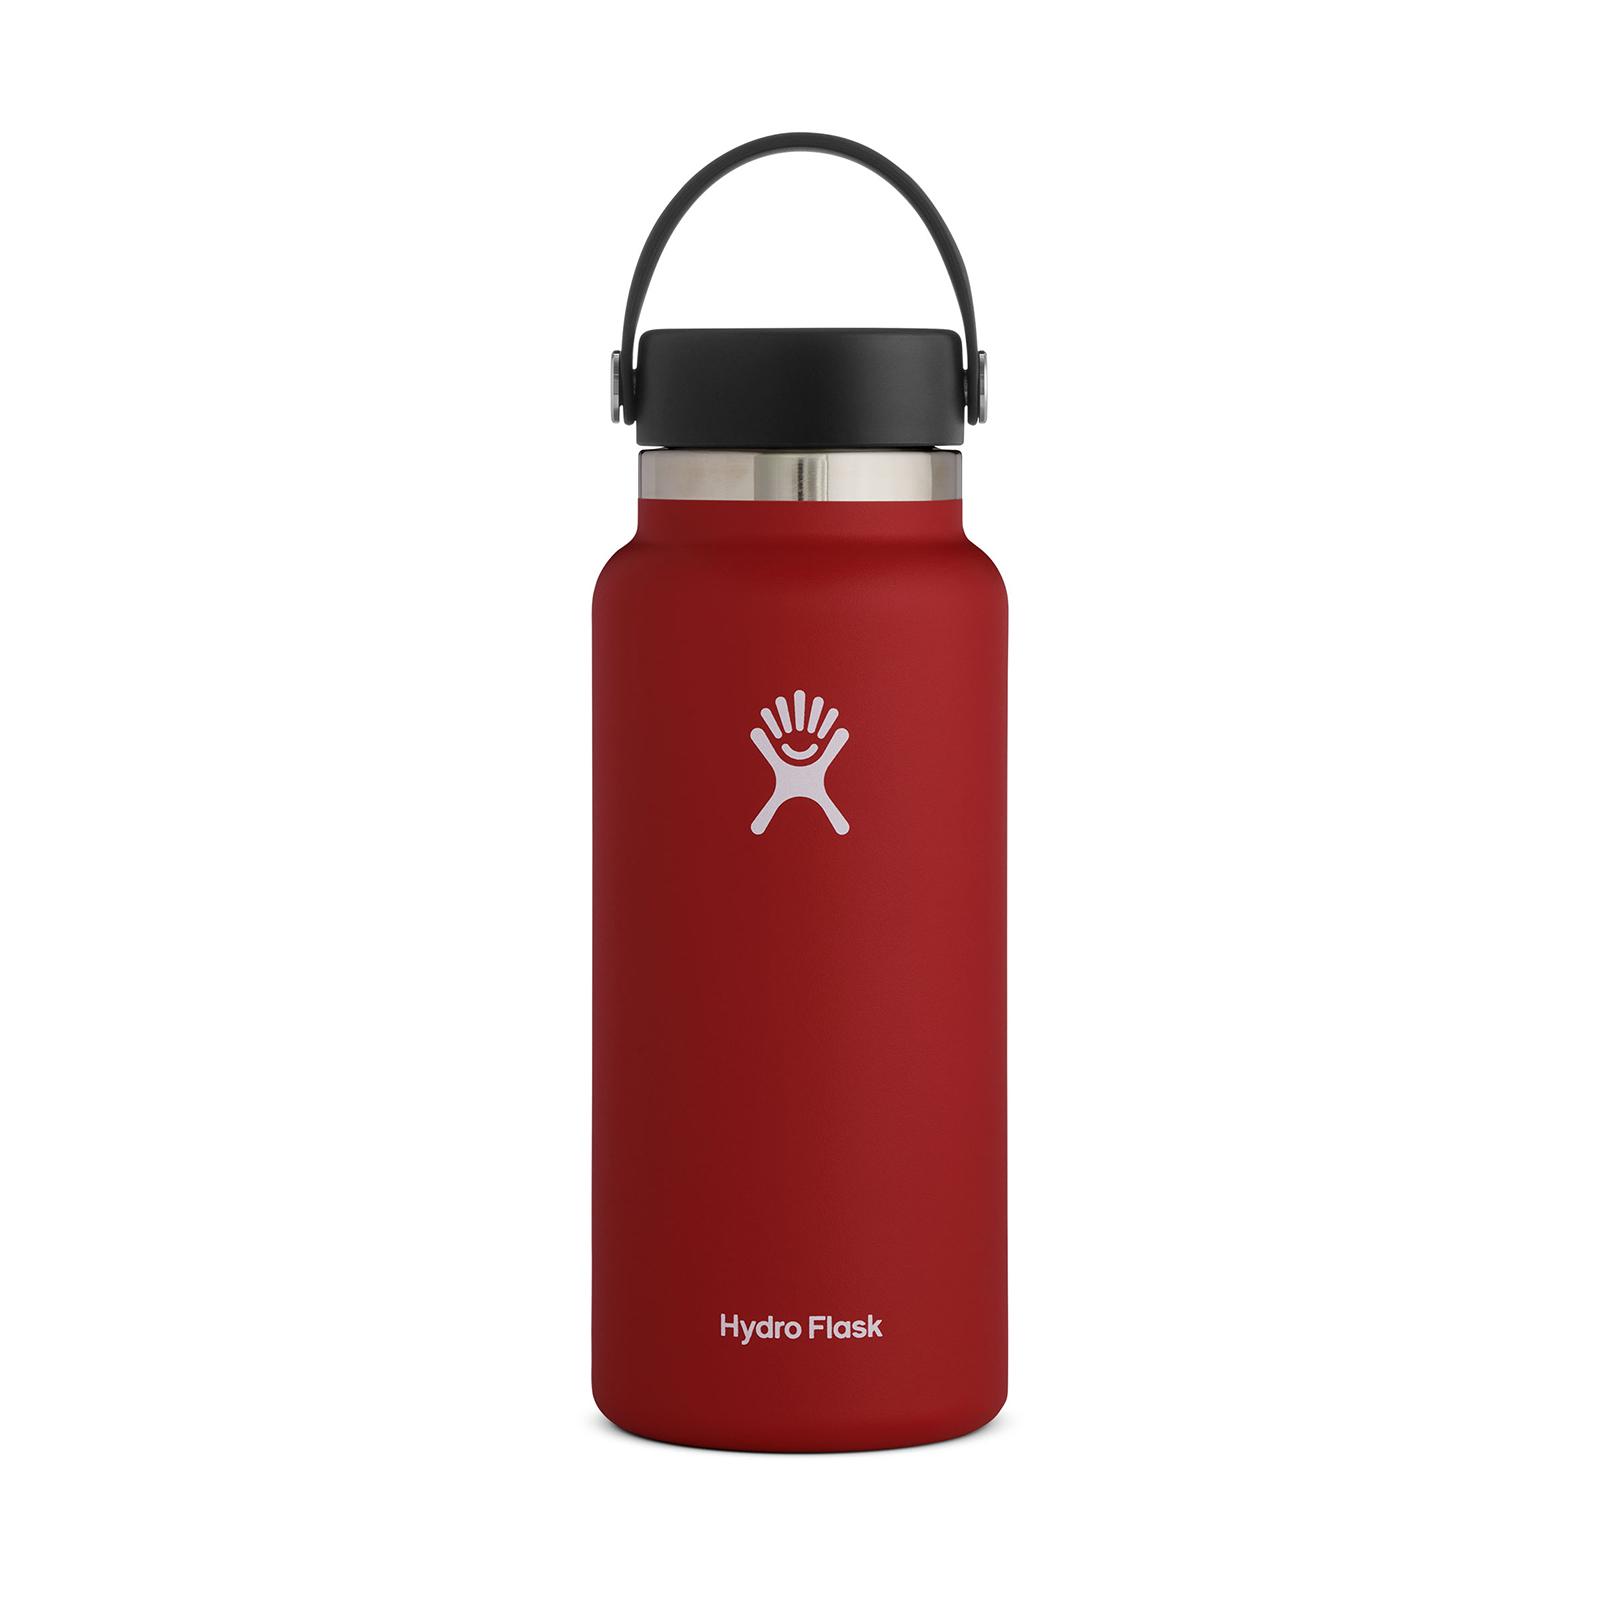 Hydro Flask 32oz Wide Mouth Lychee Red image01